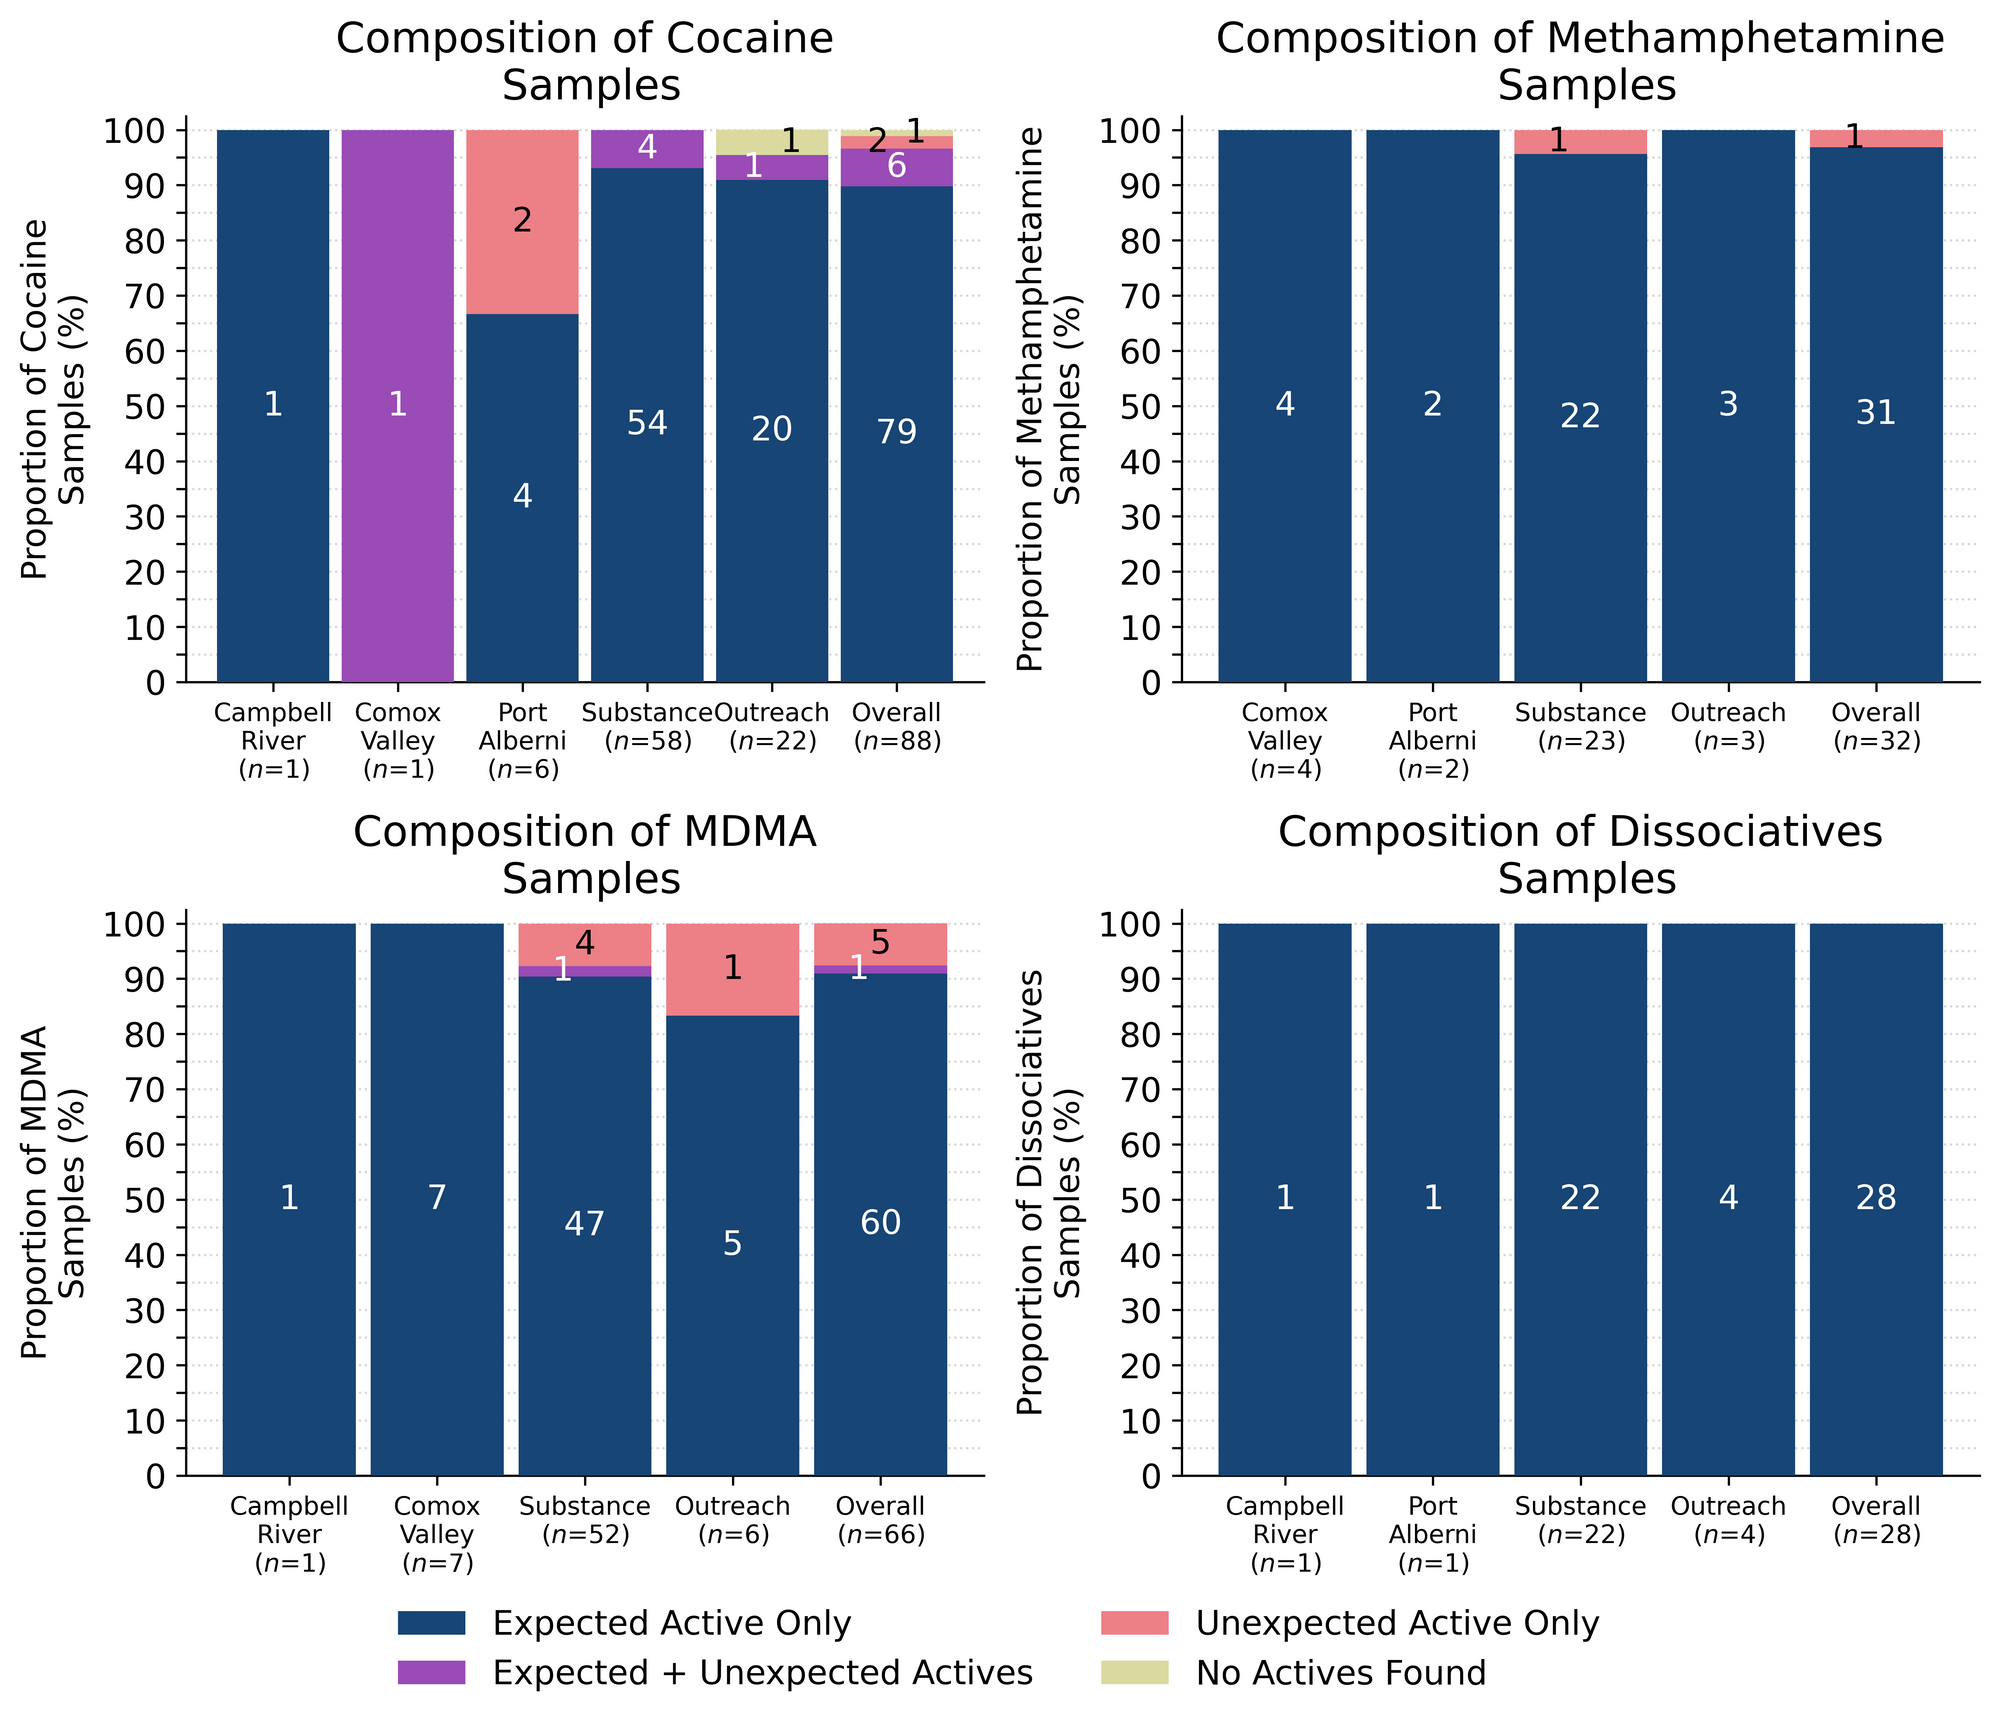 Figure 2.Compositional breakdown by drug class and sample collection location/method. Bars are stacked by the percentage of samples in each category, with the individual sample counts overlaid. "Dark Blue" regions group samples that were simply as expected with no other notable compounds detected, "Magenta" shows samples that contained the expected drug and contained an unexpected active, "Salmon" groups samples that only contained an unexpected active (the expected drug was not found), and "Pear yellow" displays samples where no active compounds were detected.